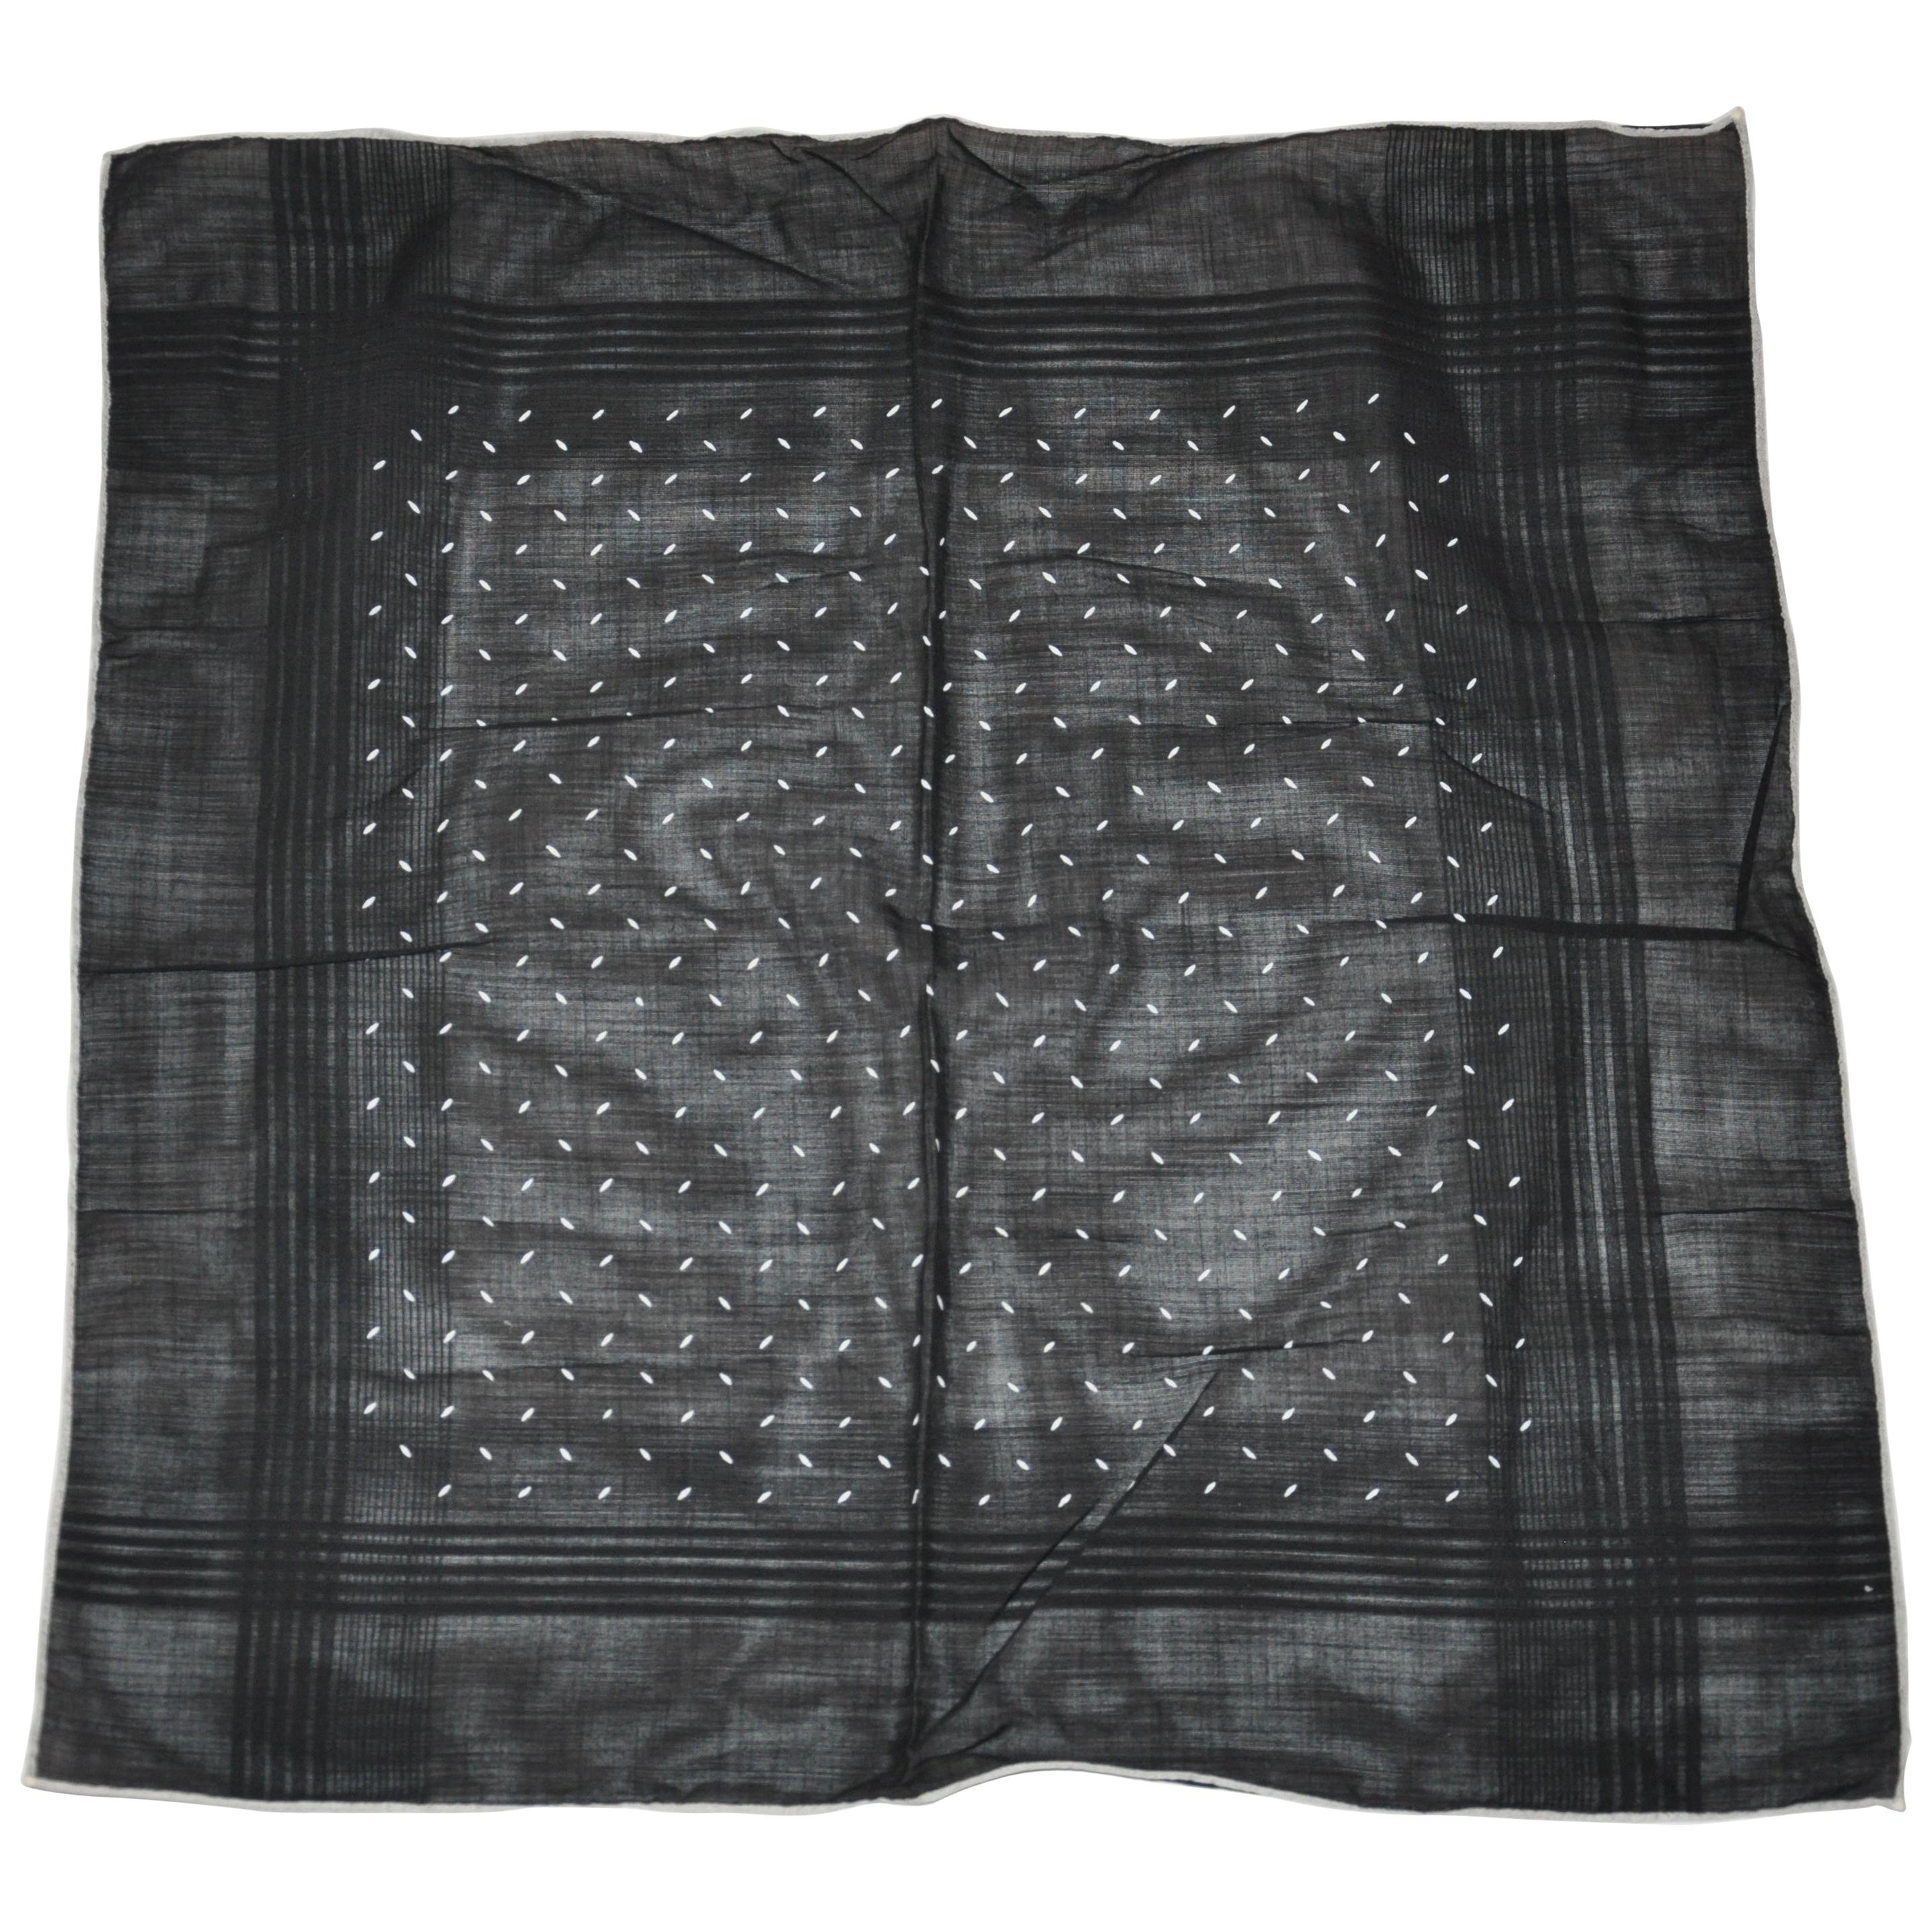 Midnight Black with Ivory Border "Raindrops" Cotton Handkerchief For Sale